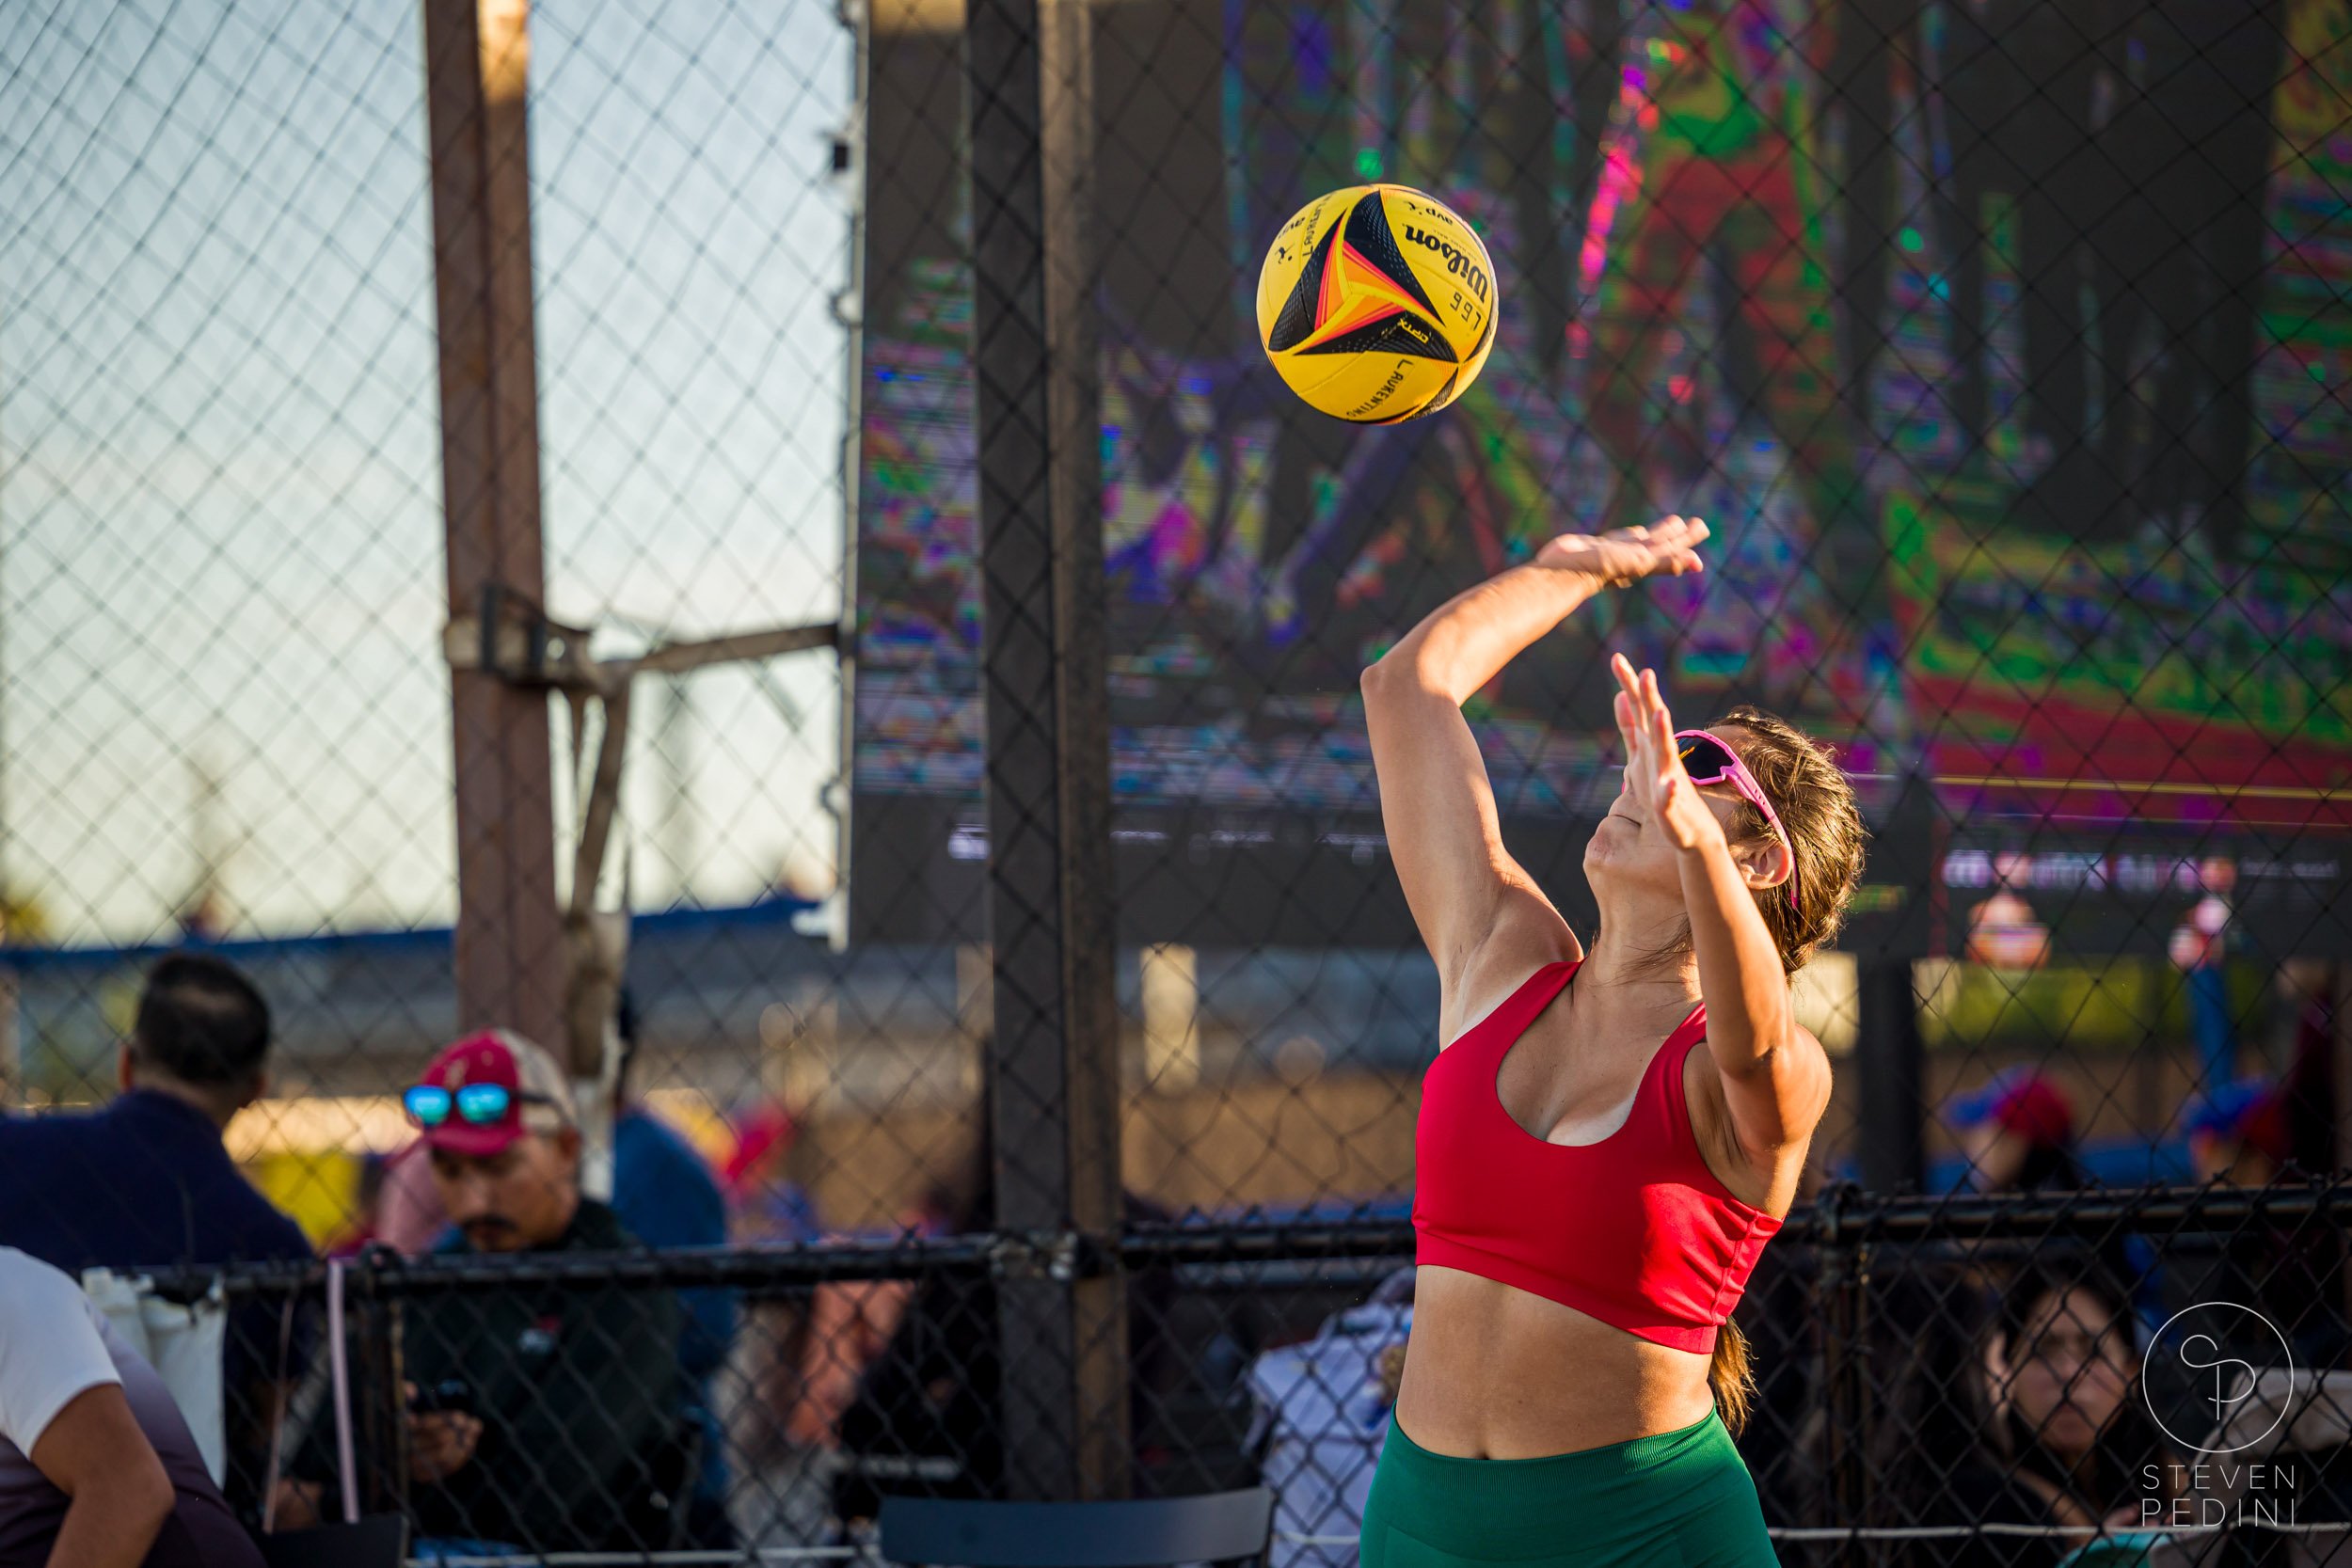 Steven Pedini Photography - Bumpy Pickle - Sand Volleyball - Houston TX - World Cup of Volleyball - 00142.jpg